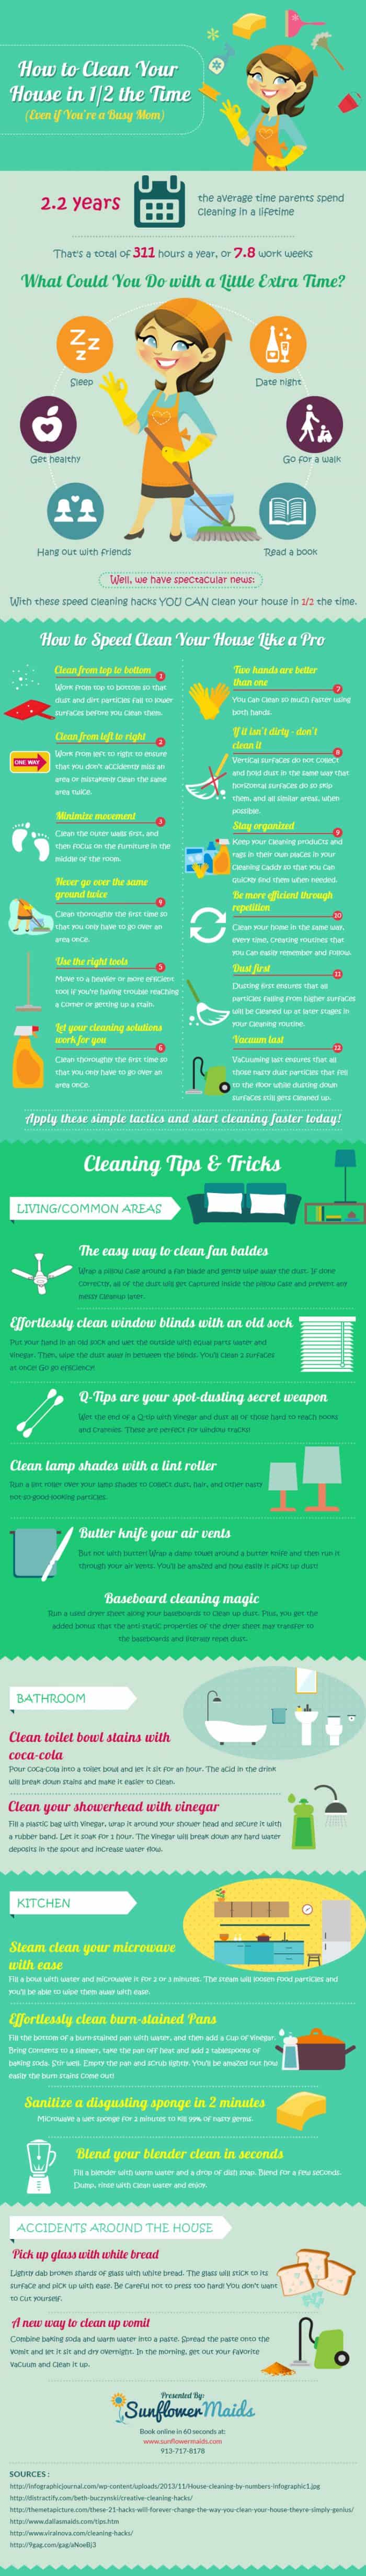 How to Clean Your House in Half The Time